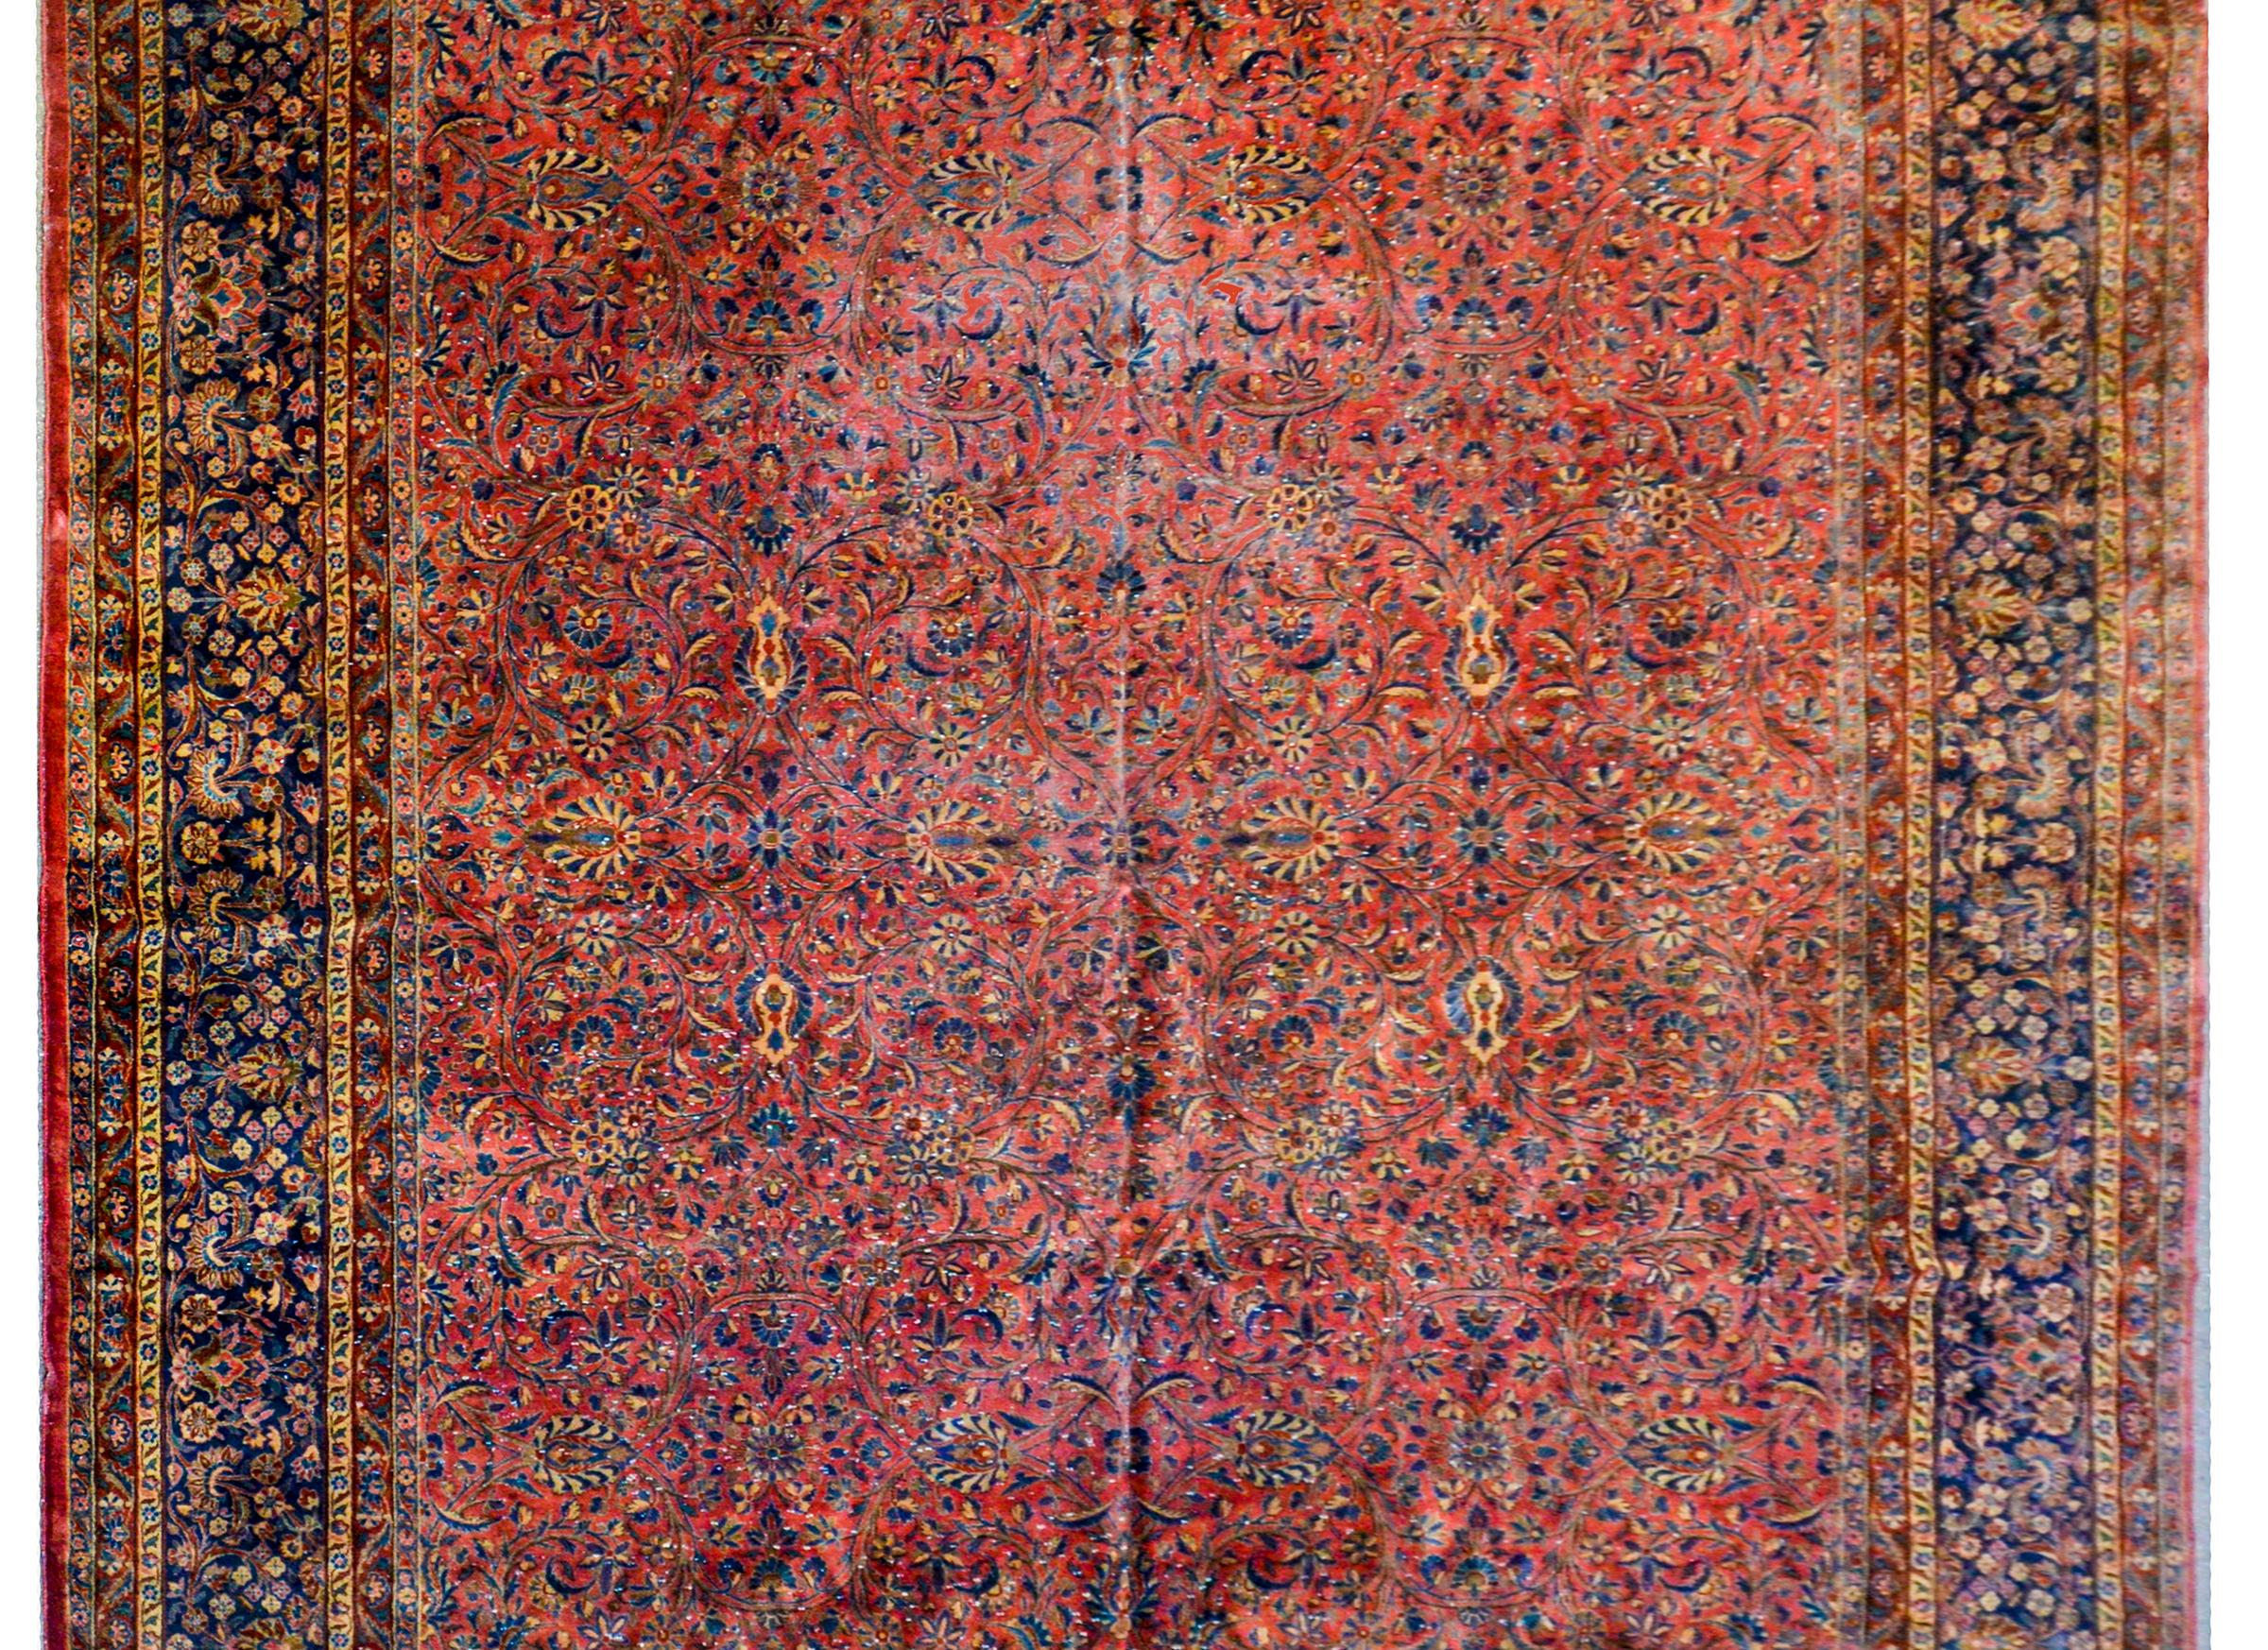 A gorgeous early 20th century Persian Kashan rug with a fantastic all-over mirrored floral and vine pattern woven in light and dark indigo, cream, pink, and gold vegetable dyed wool. The border is wonderful with a wide central floral and vine stripe